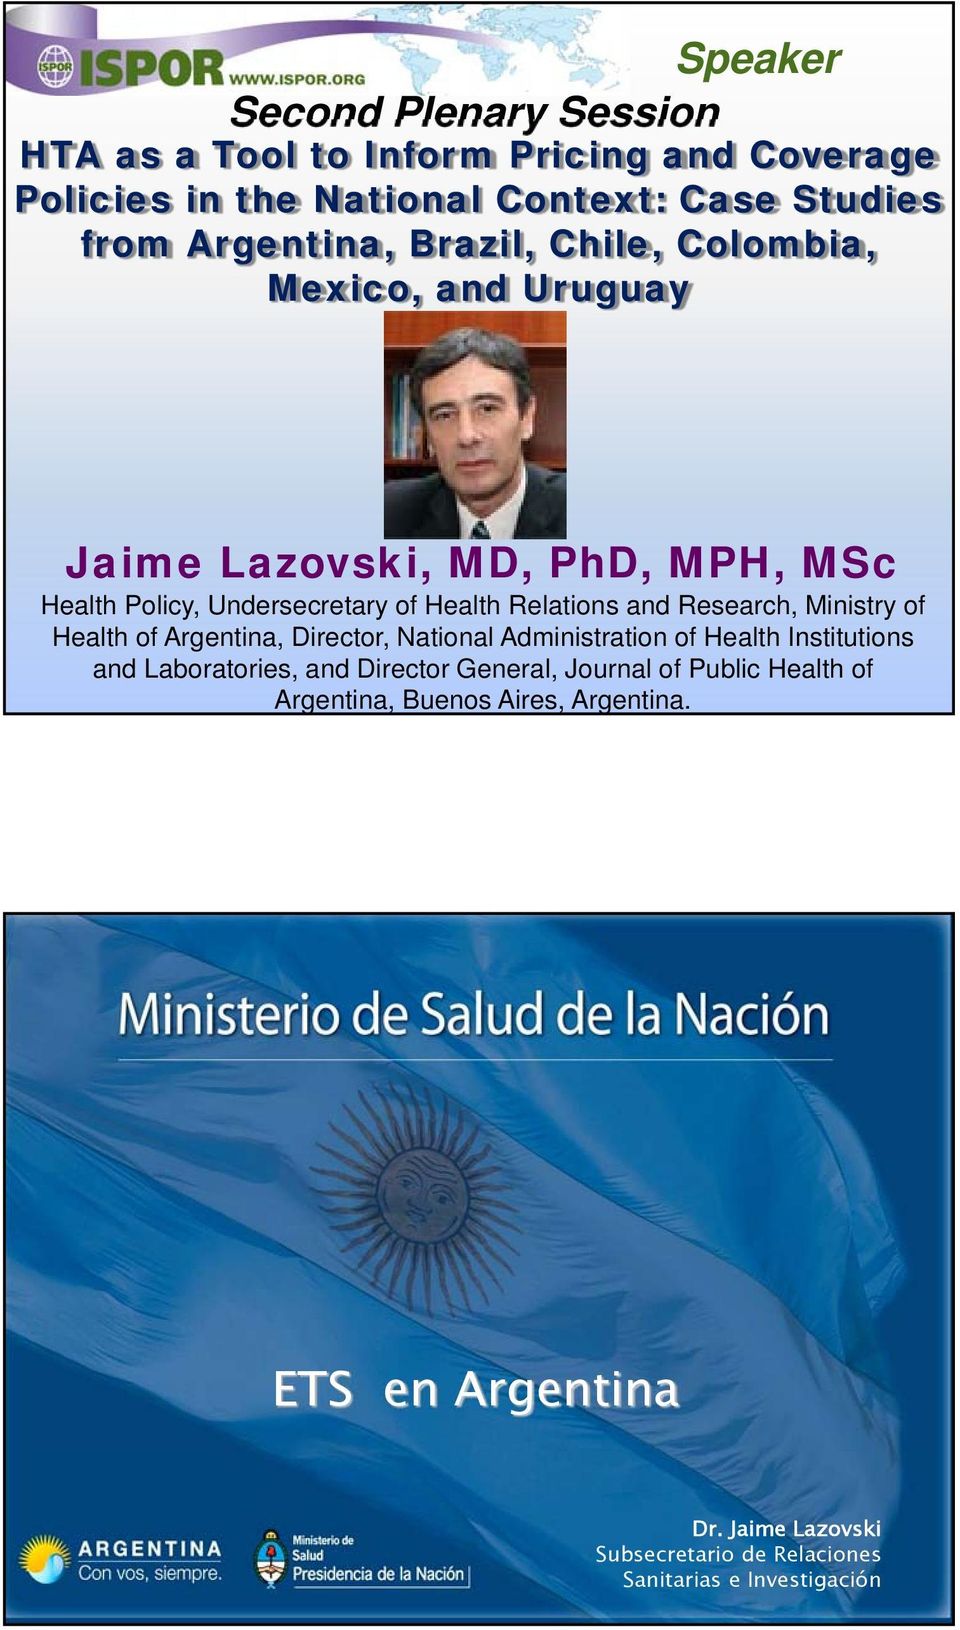 Research, Ministry of Health of Argentina, Director, National Administration of Health Institutions and Laboratories, and Director General,